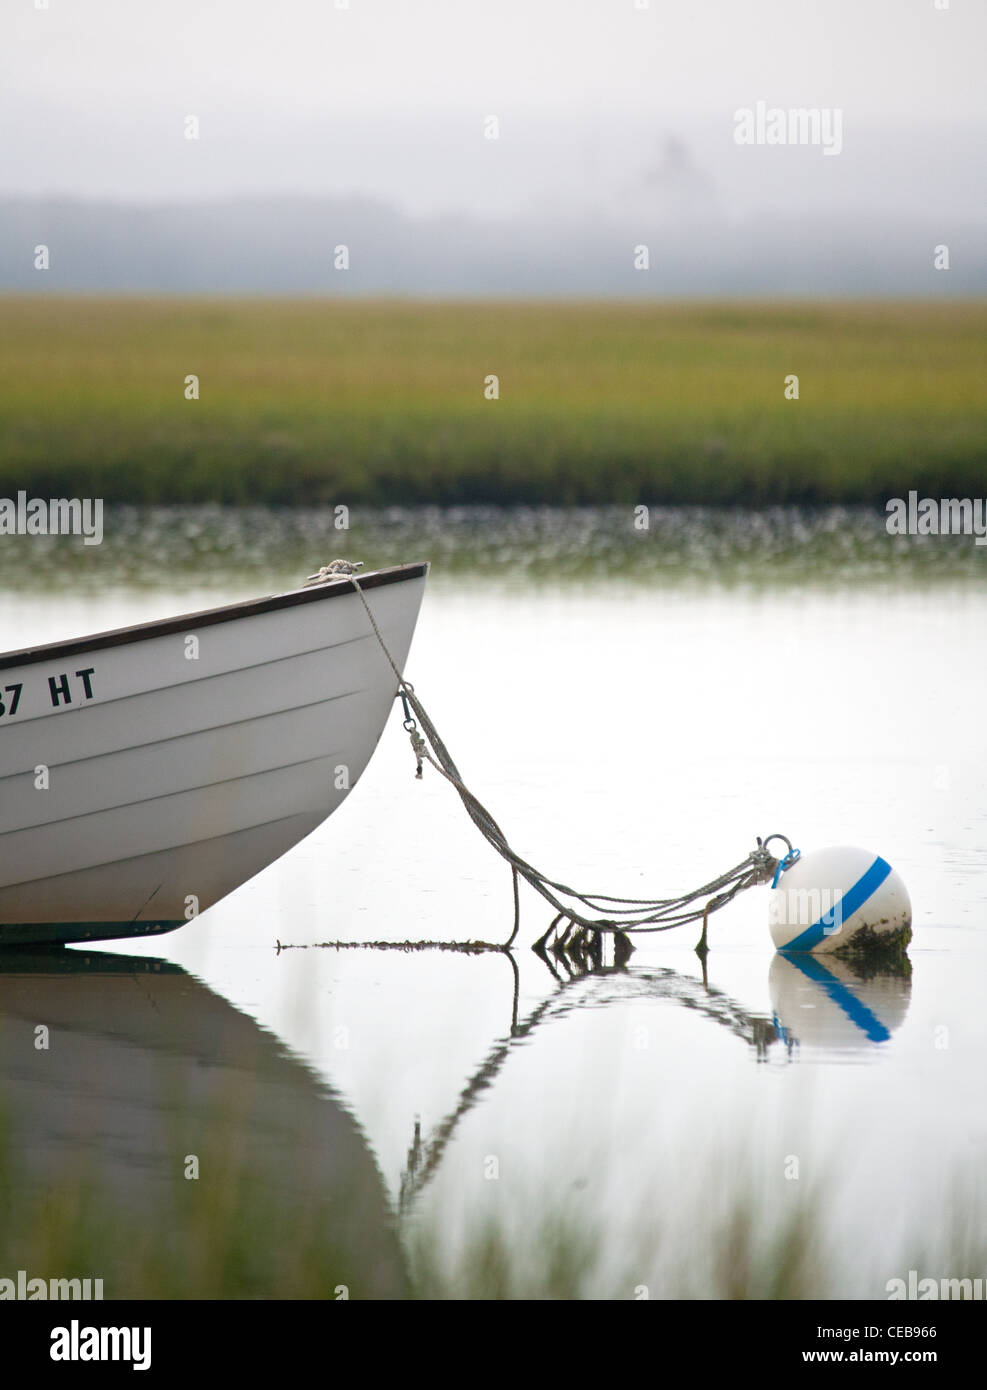 bow of small boat tied to mooring on misty day Stock Photo